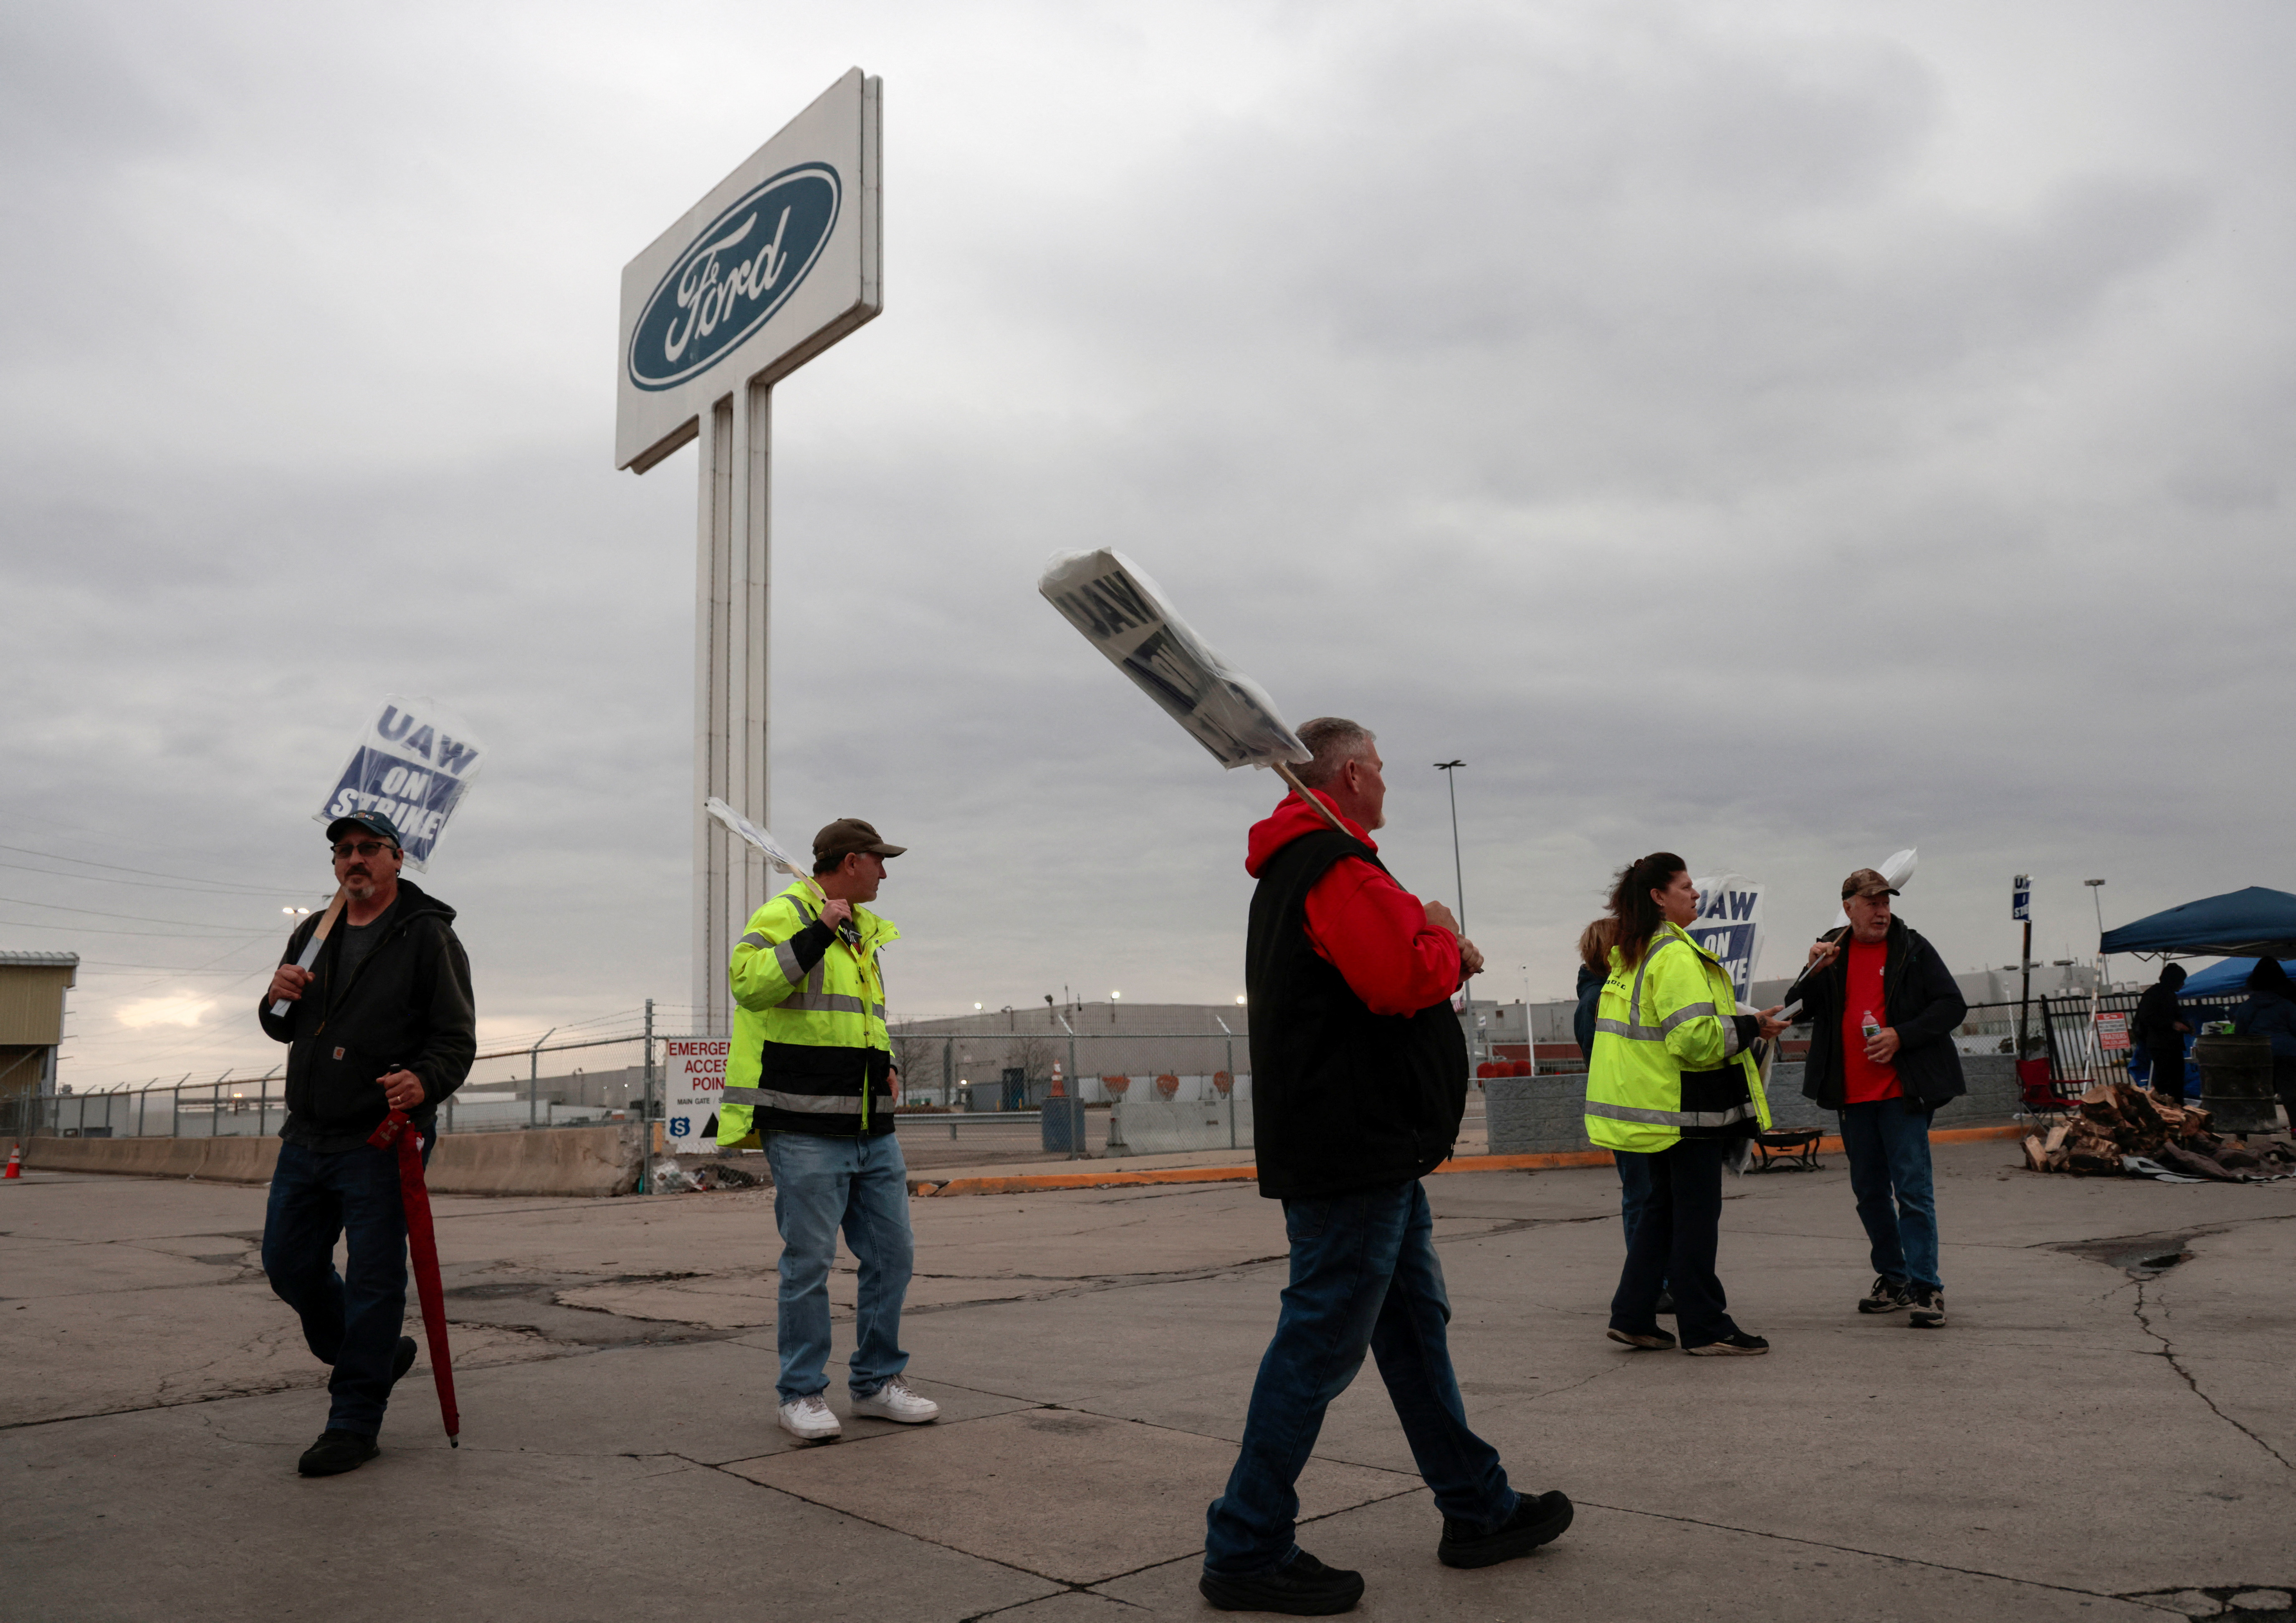 UAW reaches deal with GM, ends coordinated strikes against Detroit